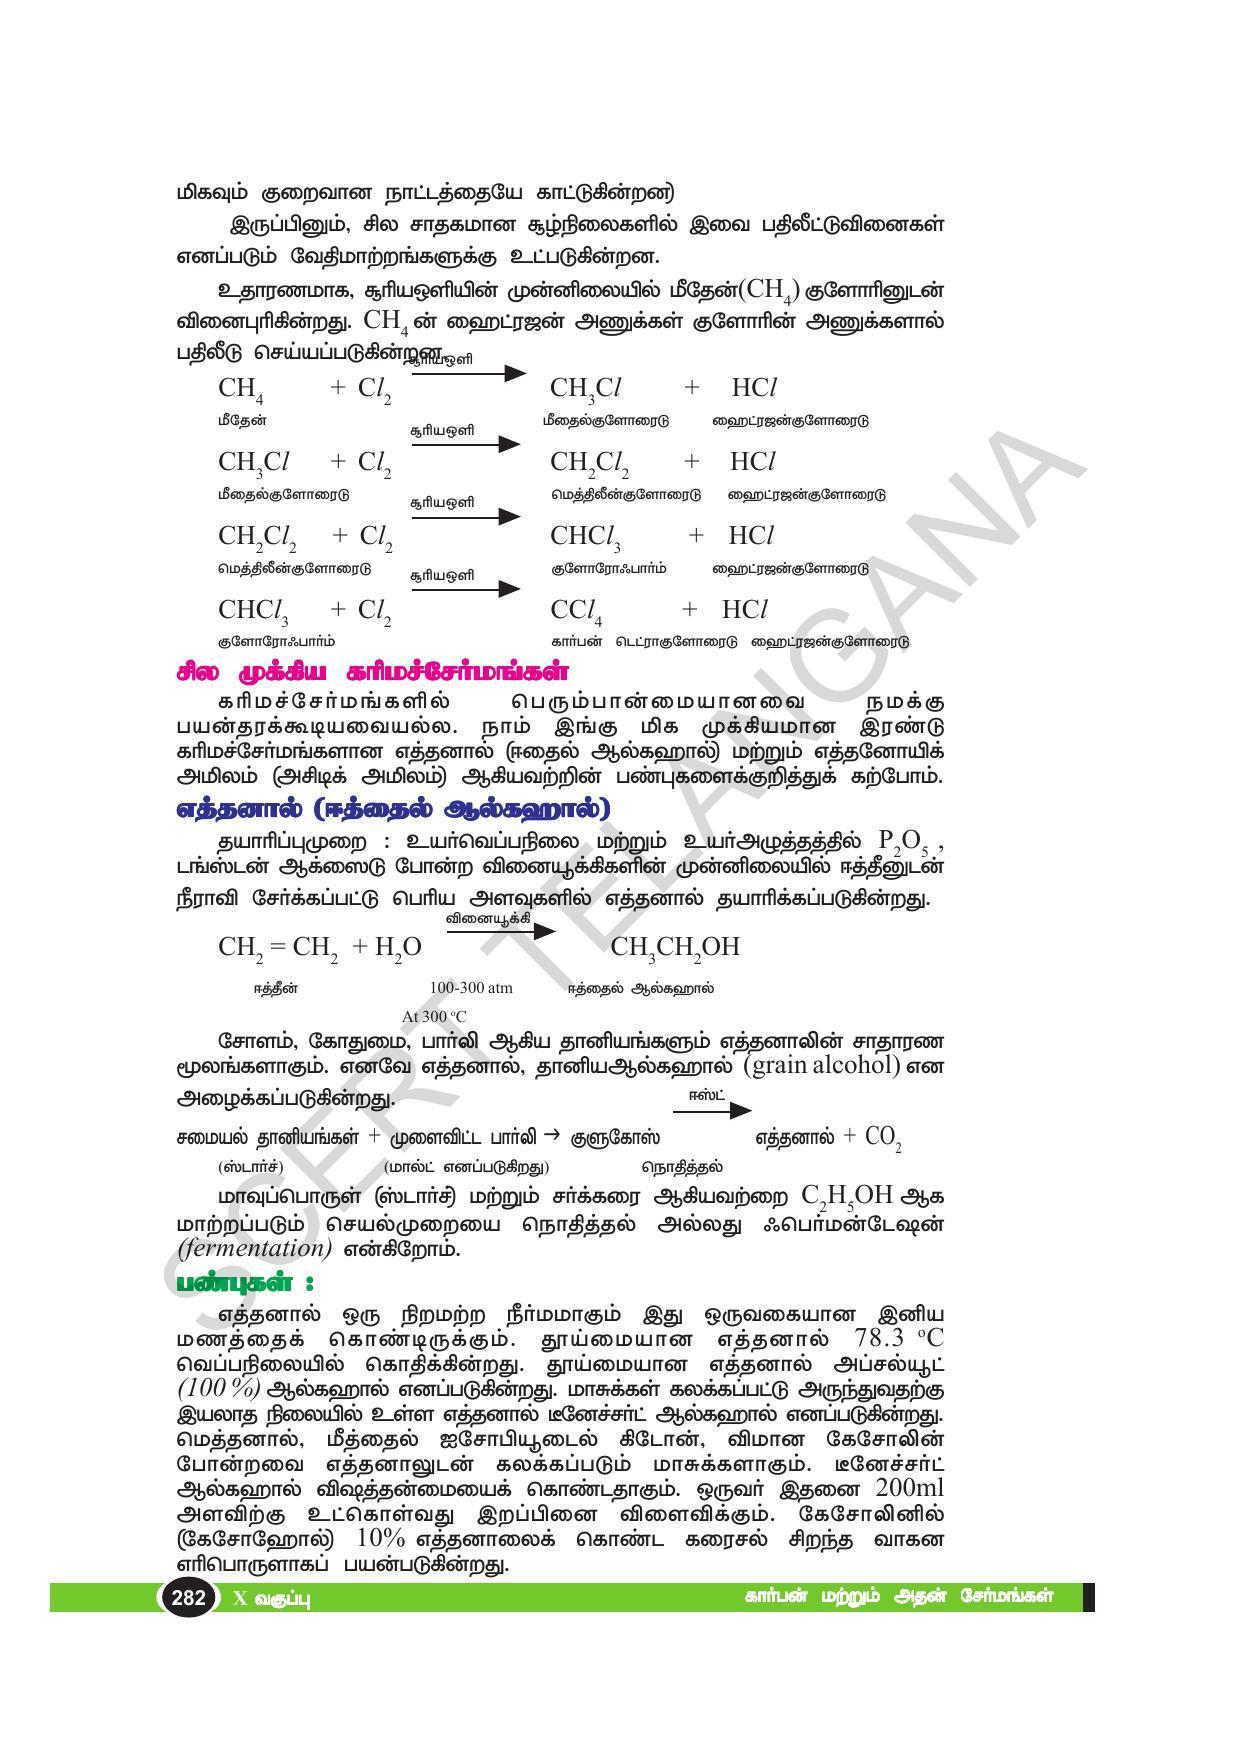 TS SCERT Class 10 Physical Science(Tamil Medium) Text Book - Page 294